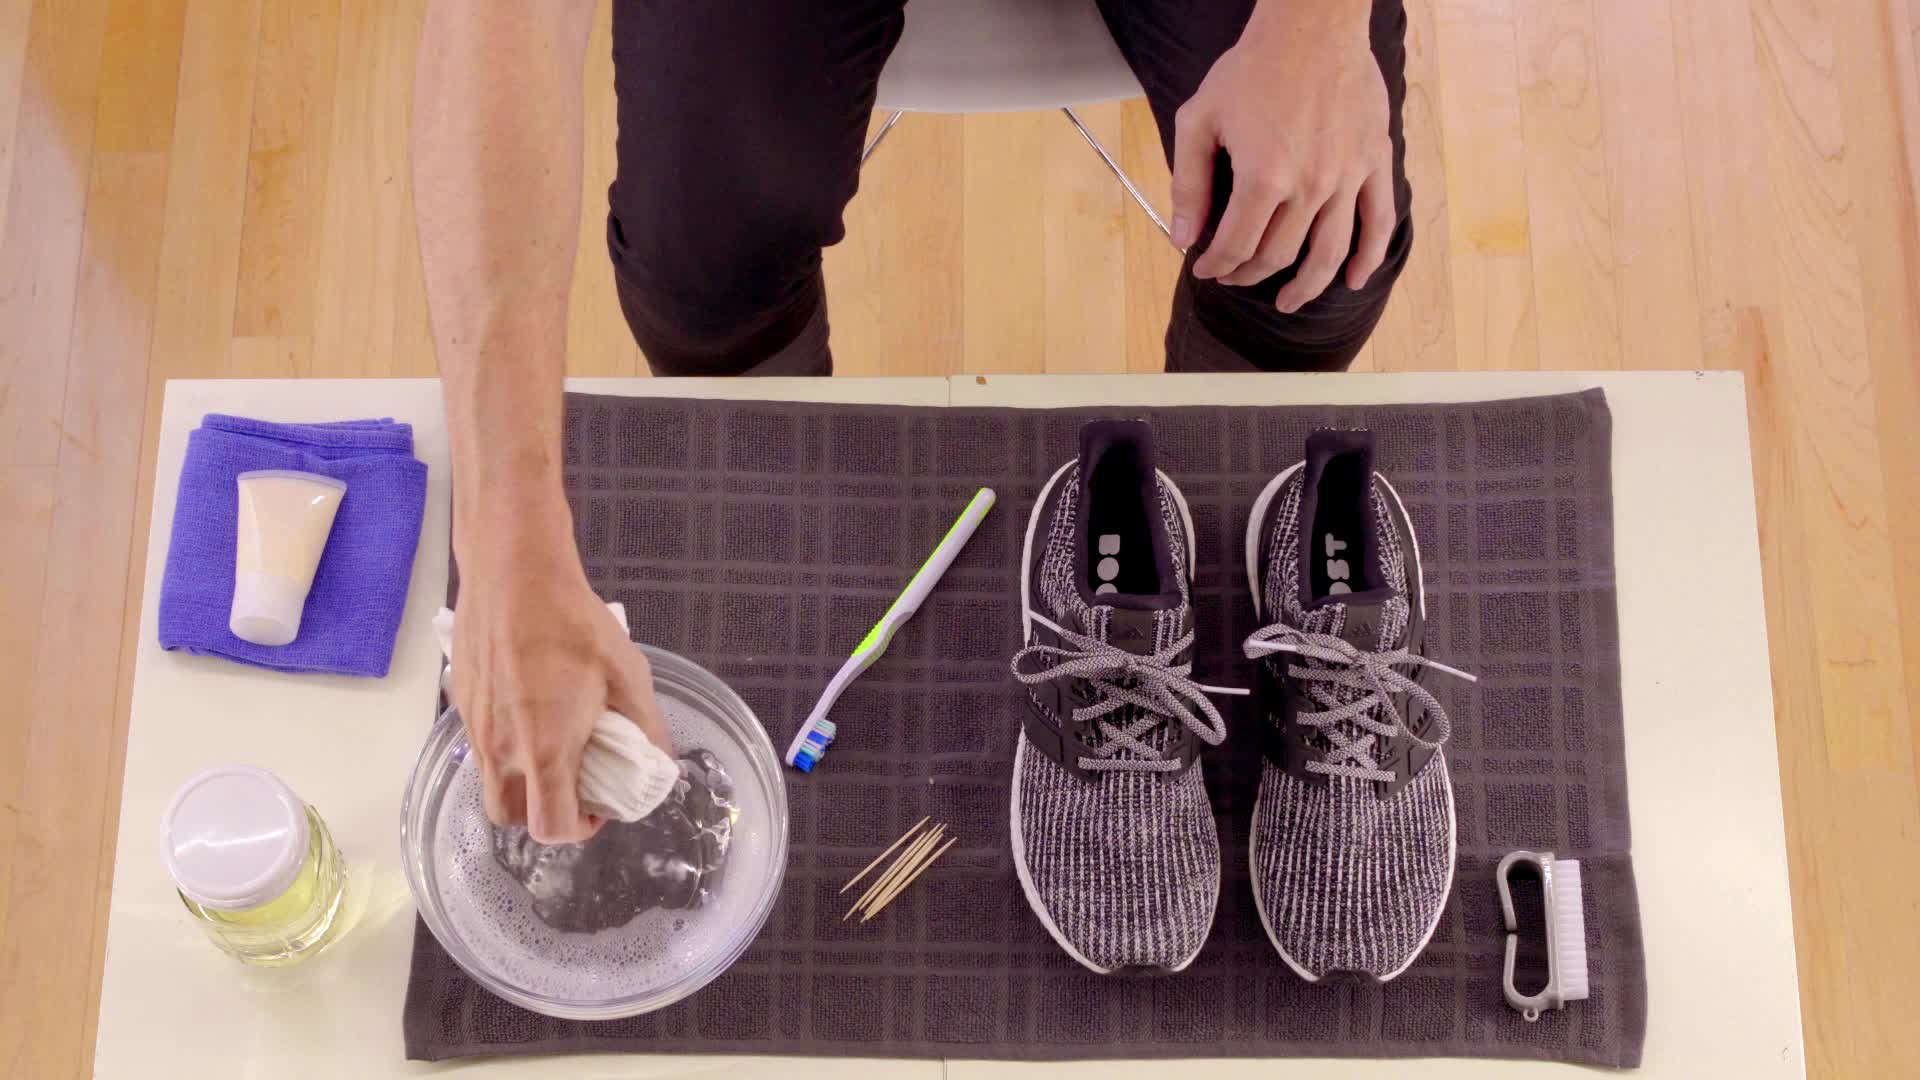 HOW TO CLEAN RUNNING SHOES